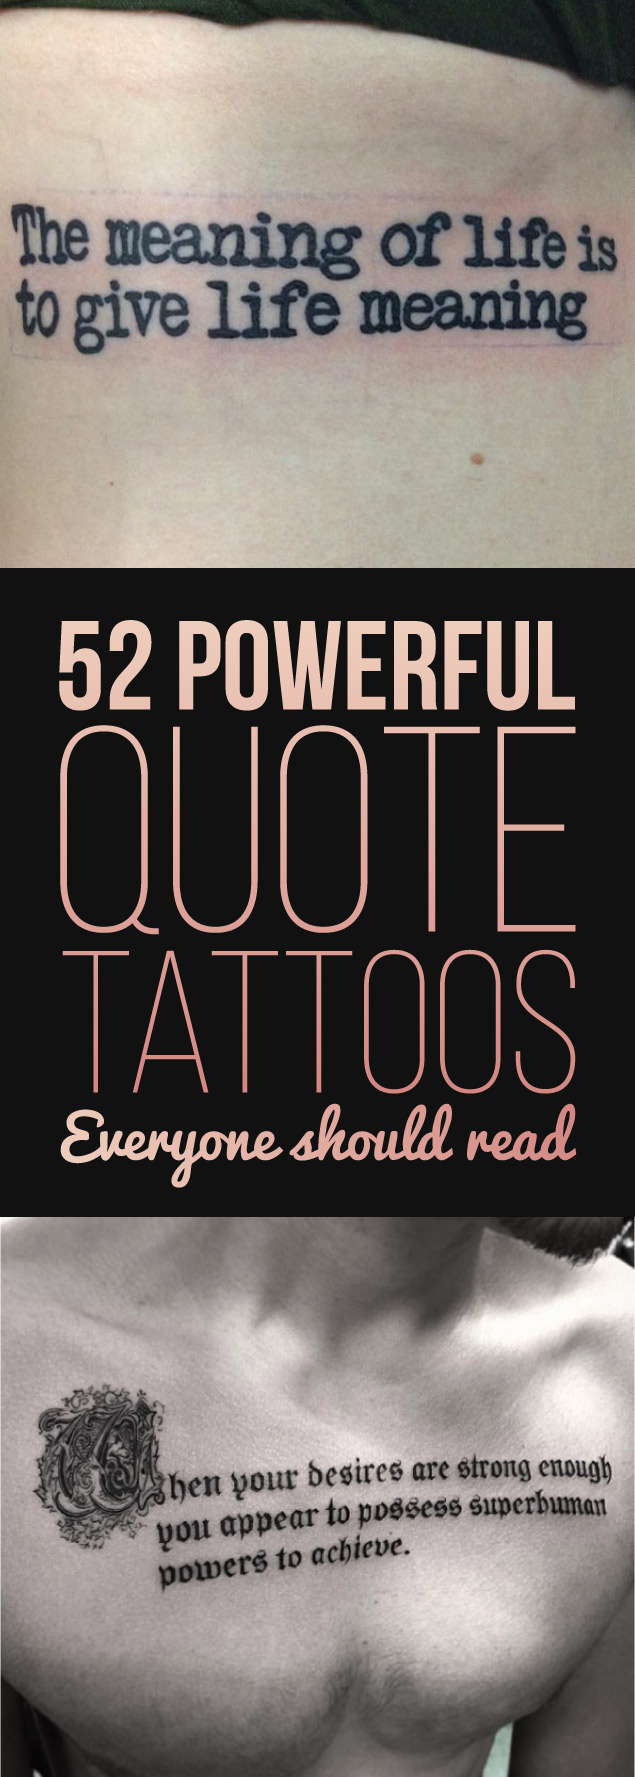 52 Powerful Quote Tattoos Everyone Should Read | TattooBlend